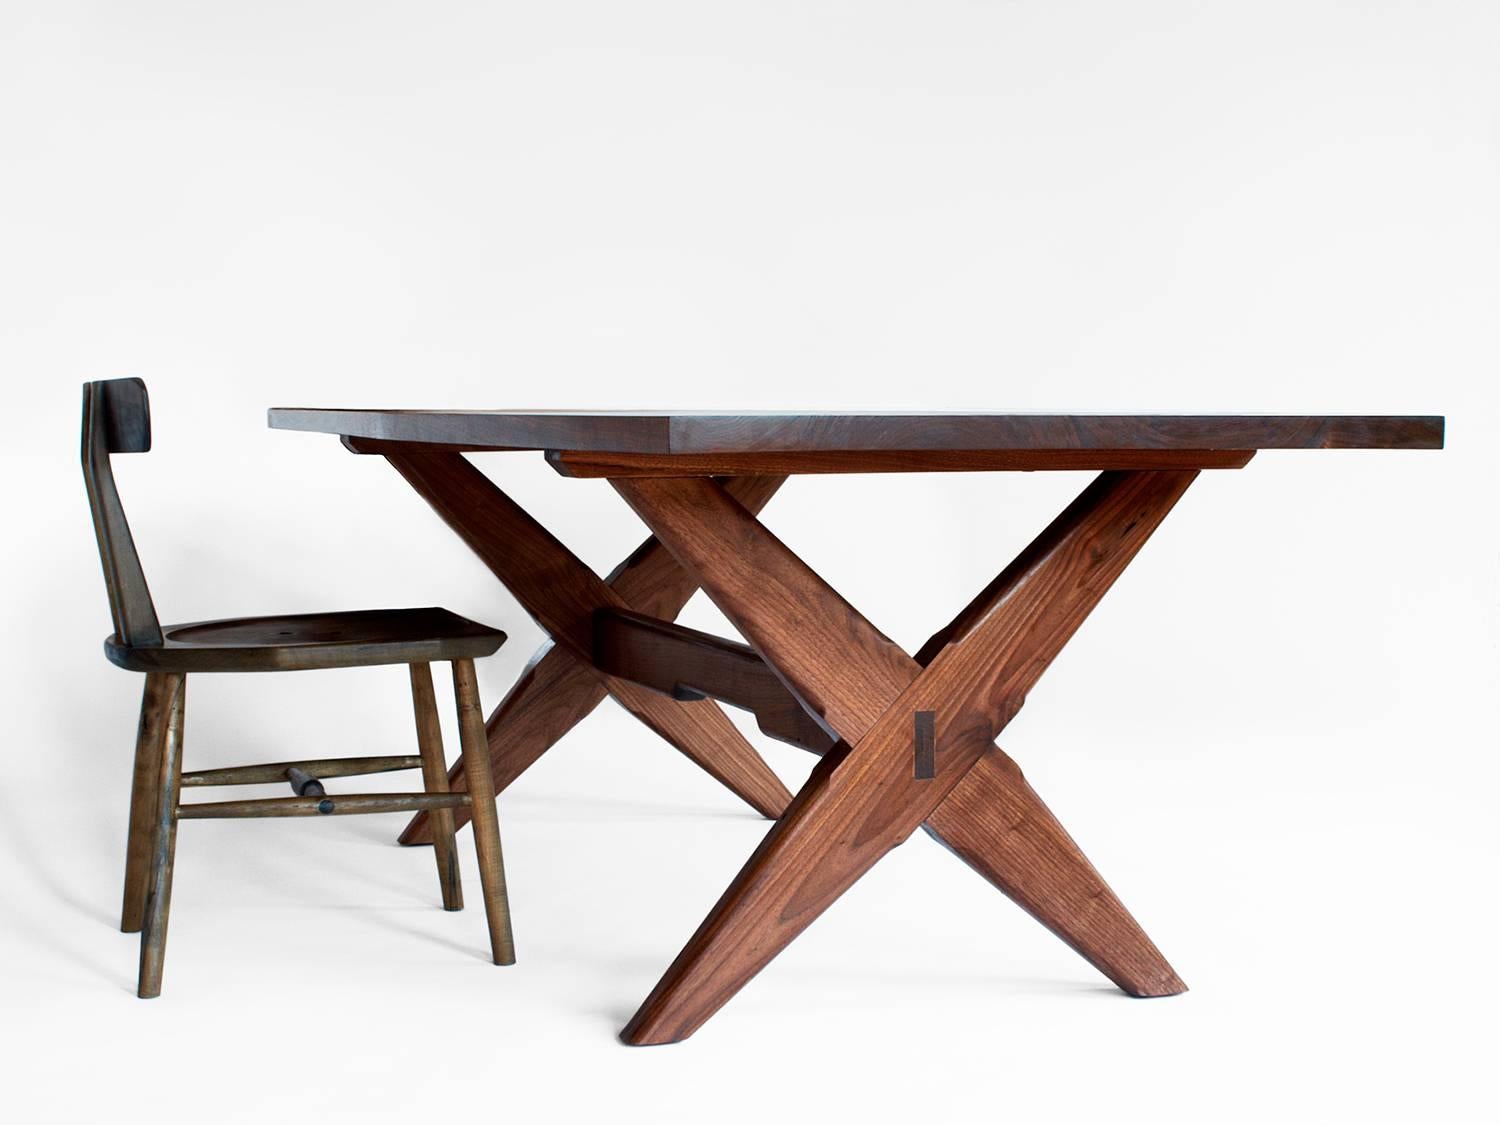 The Founders dining table is a modern interpretation of the Sawbuck style table. Available with a hexagonal, oval, live edge or rectangular top and featuring traditional and modern joinery techniques. Custom sizing is available. Wood options include